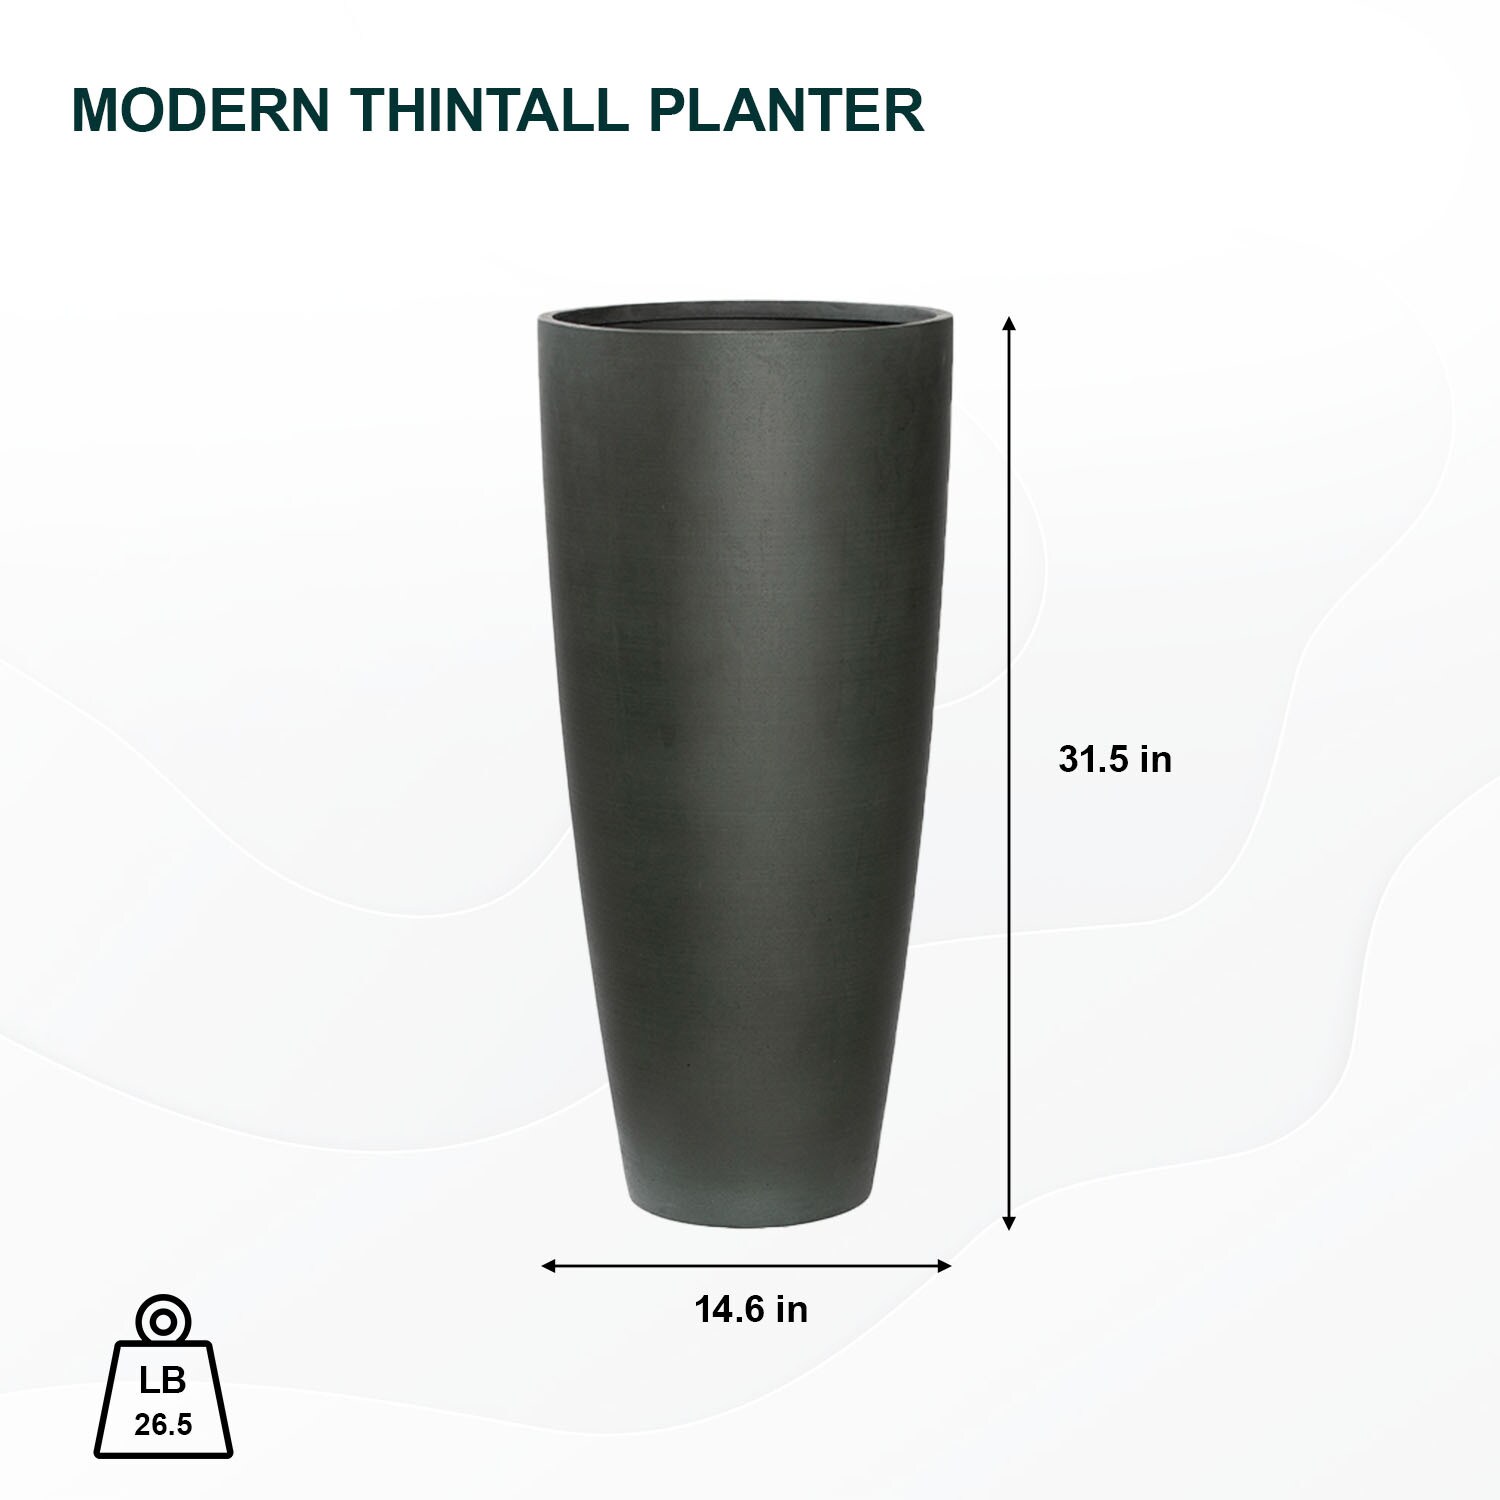 Pottery Pots 14.6-in W x 31.5-in H Pine Green Stone Planter at Lowes.com